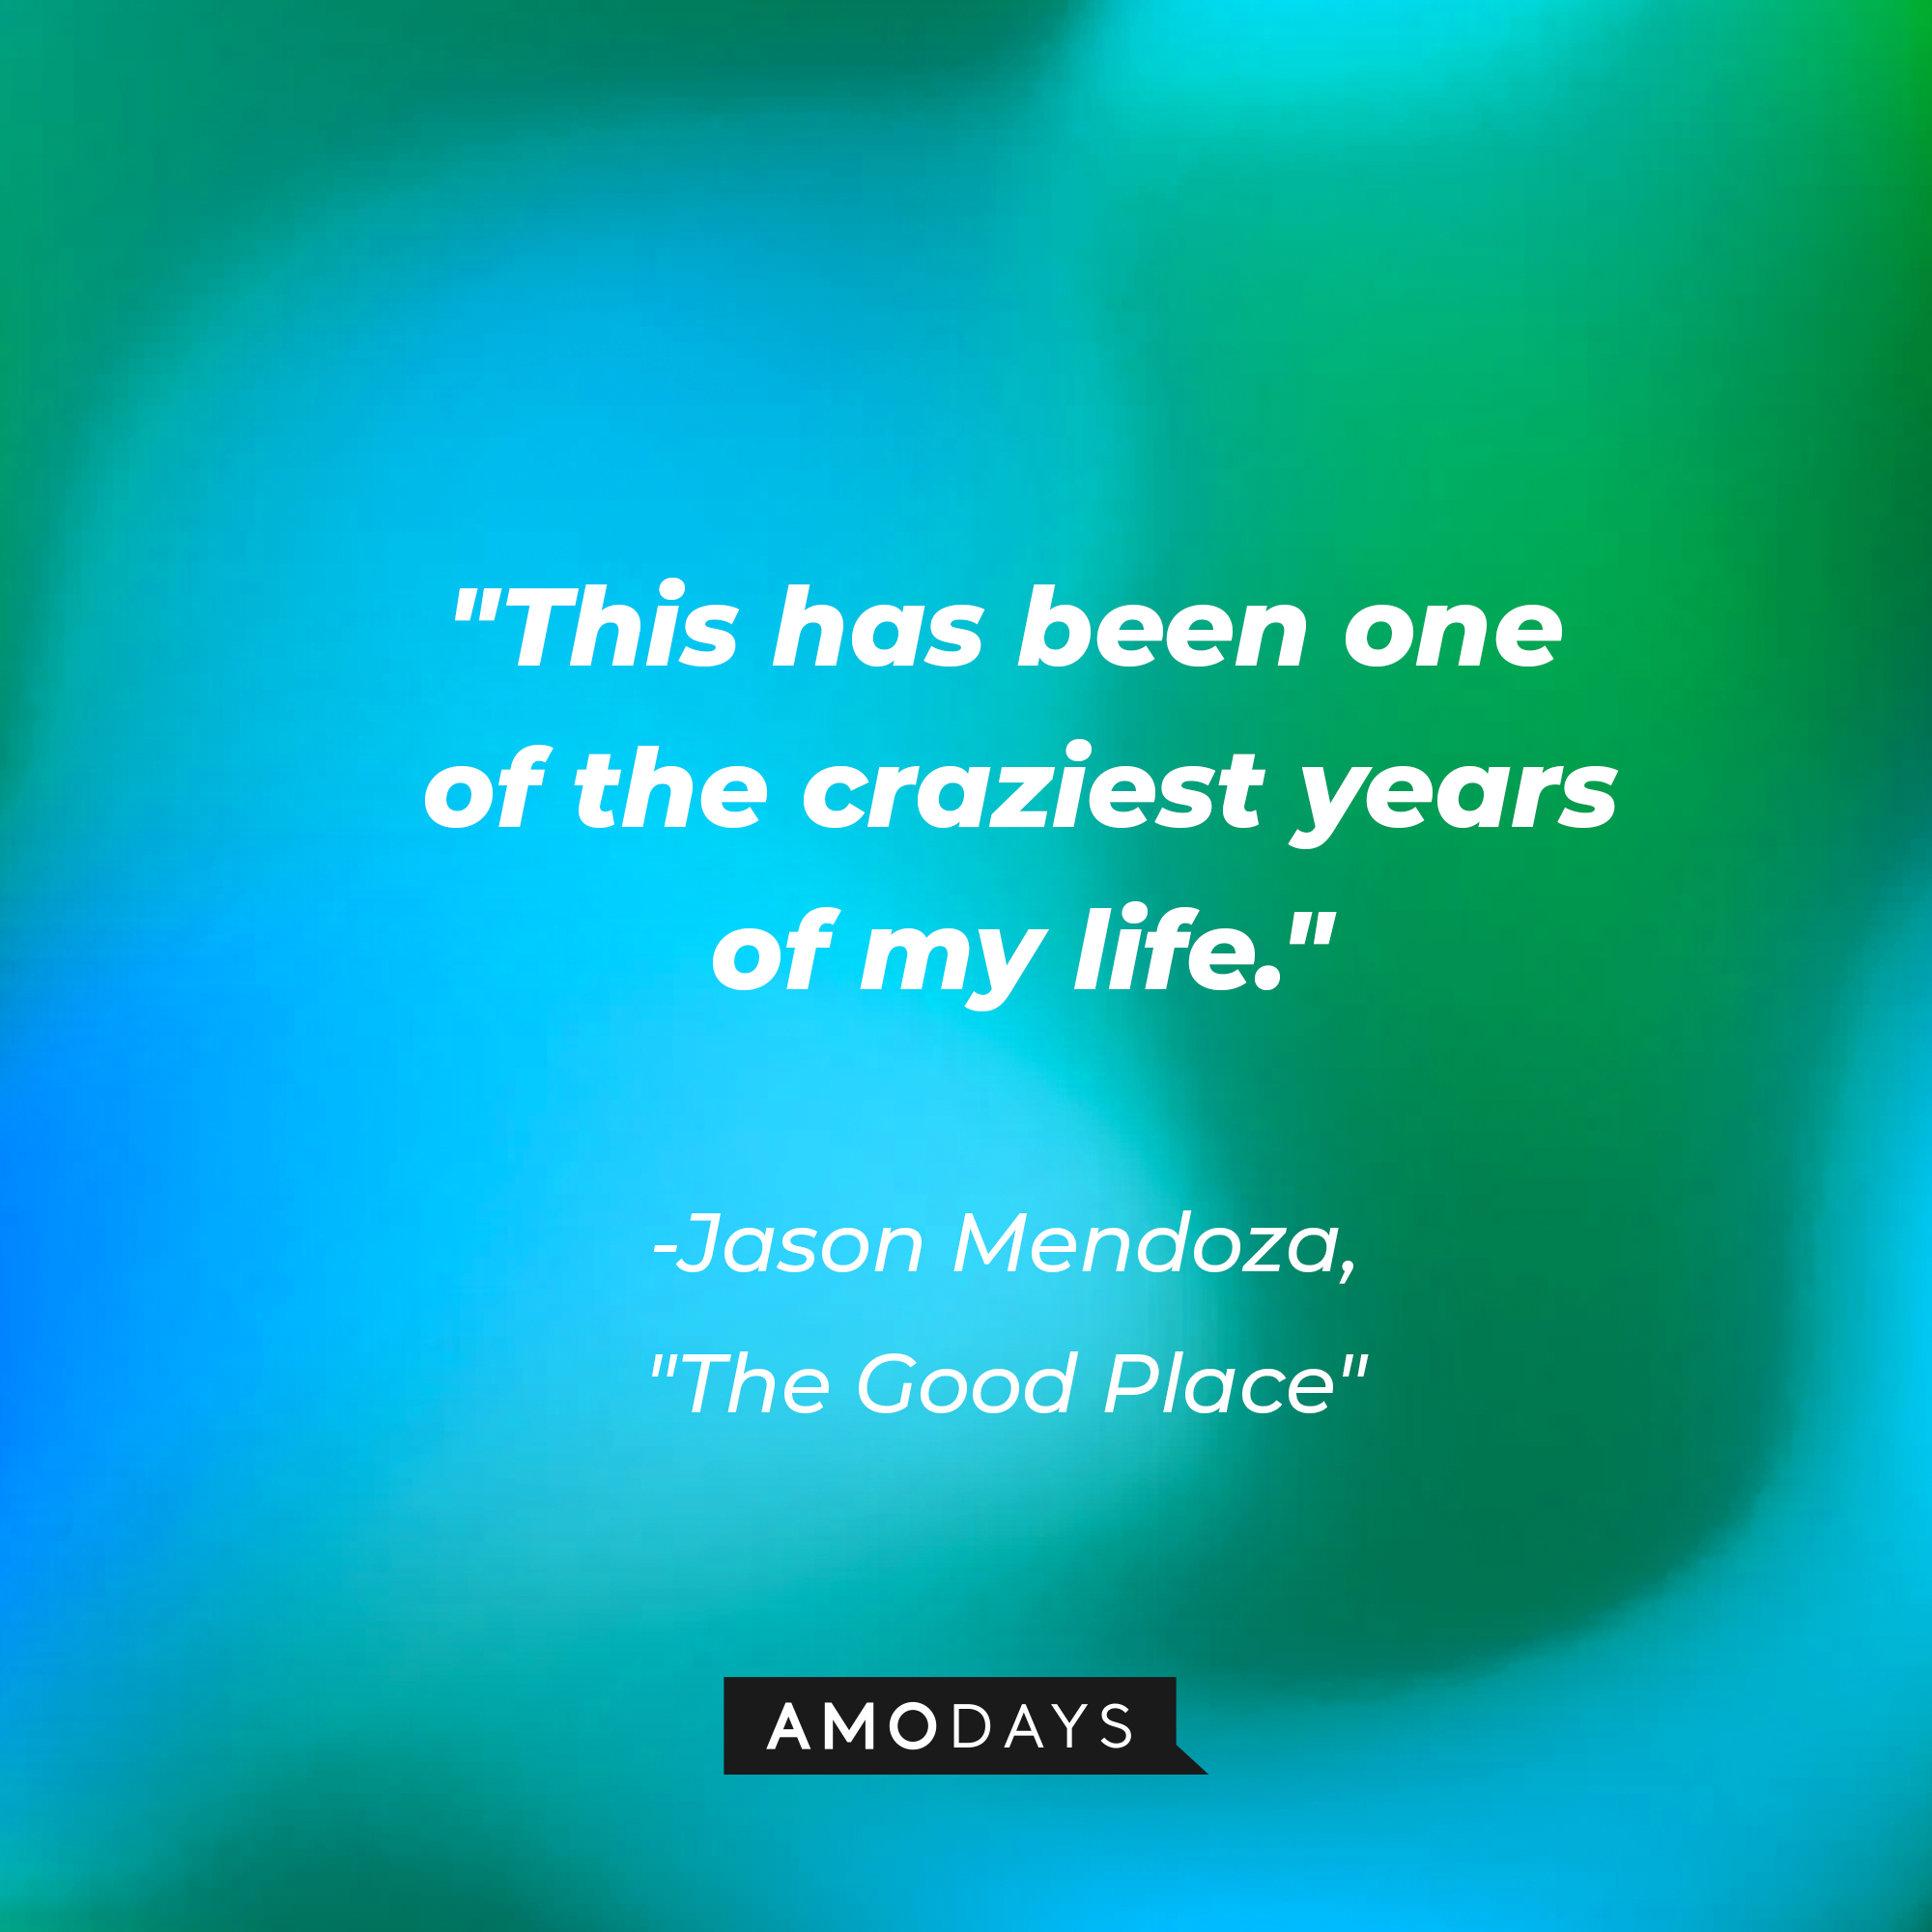 Jason Mendoza's quote in "The Good Place:" “This has been one of the craziest years of my life.” | Source: Amodays